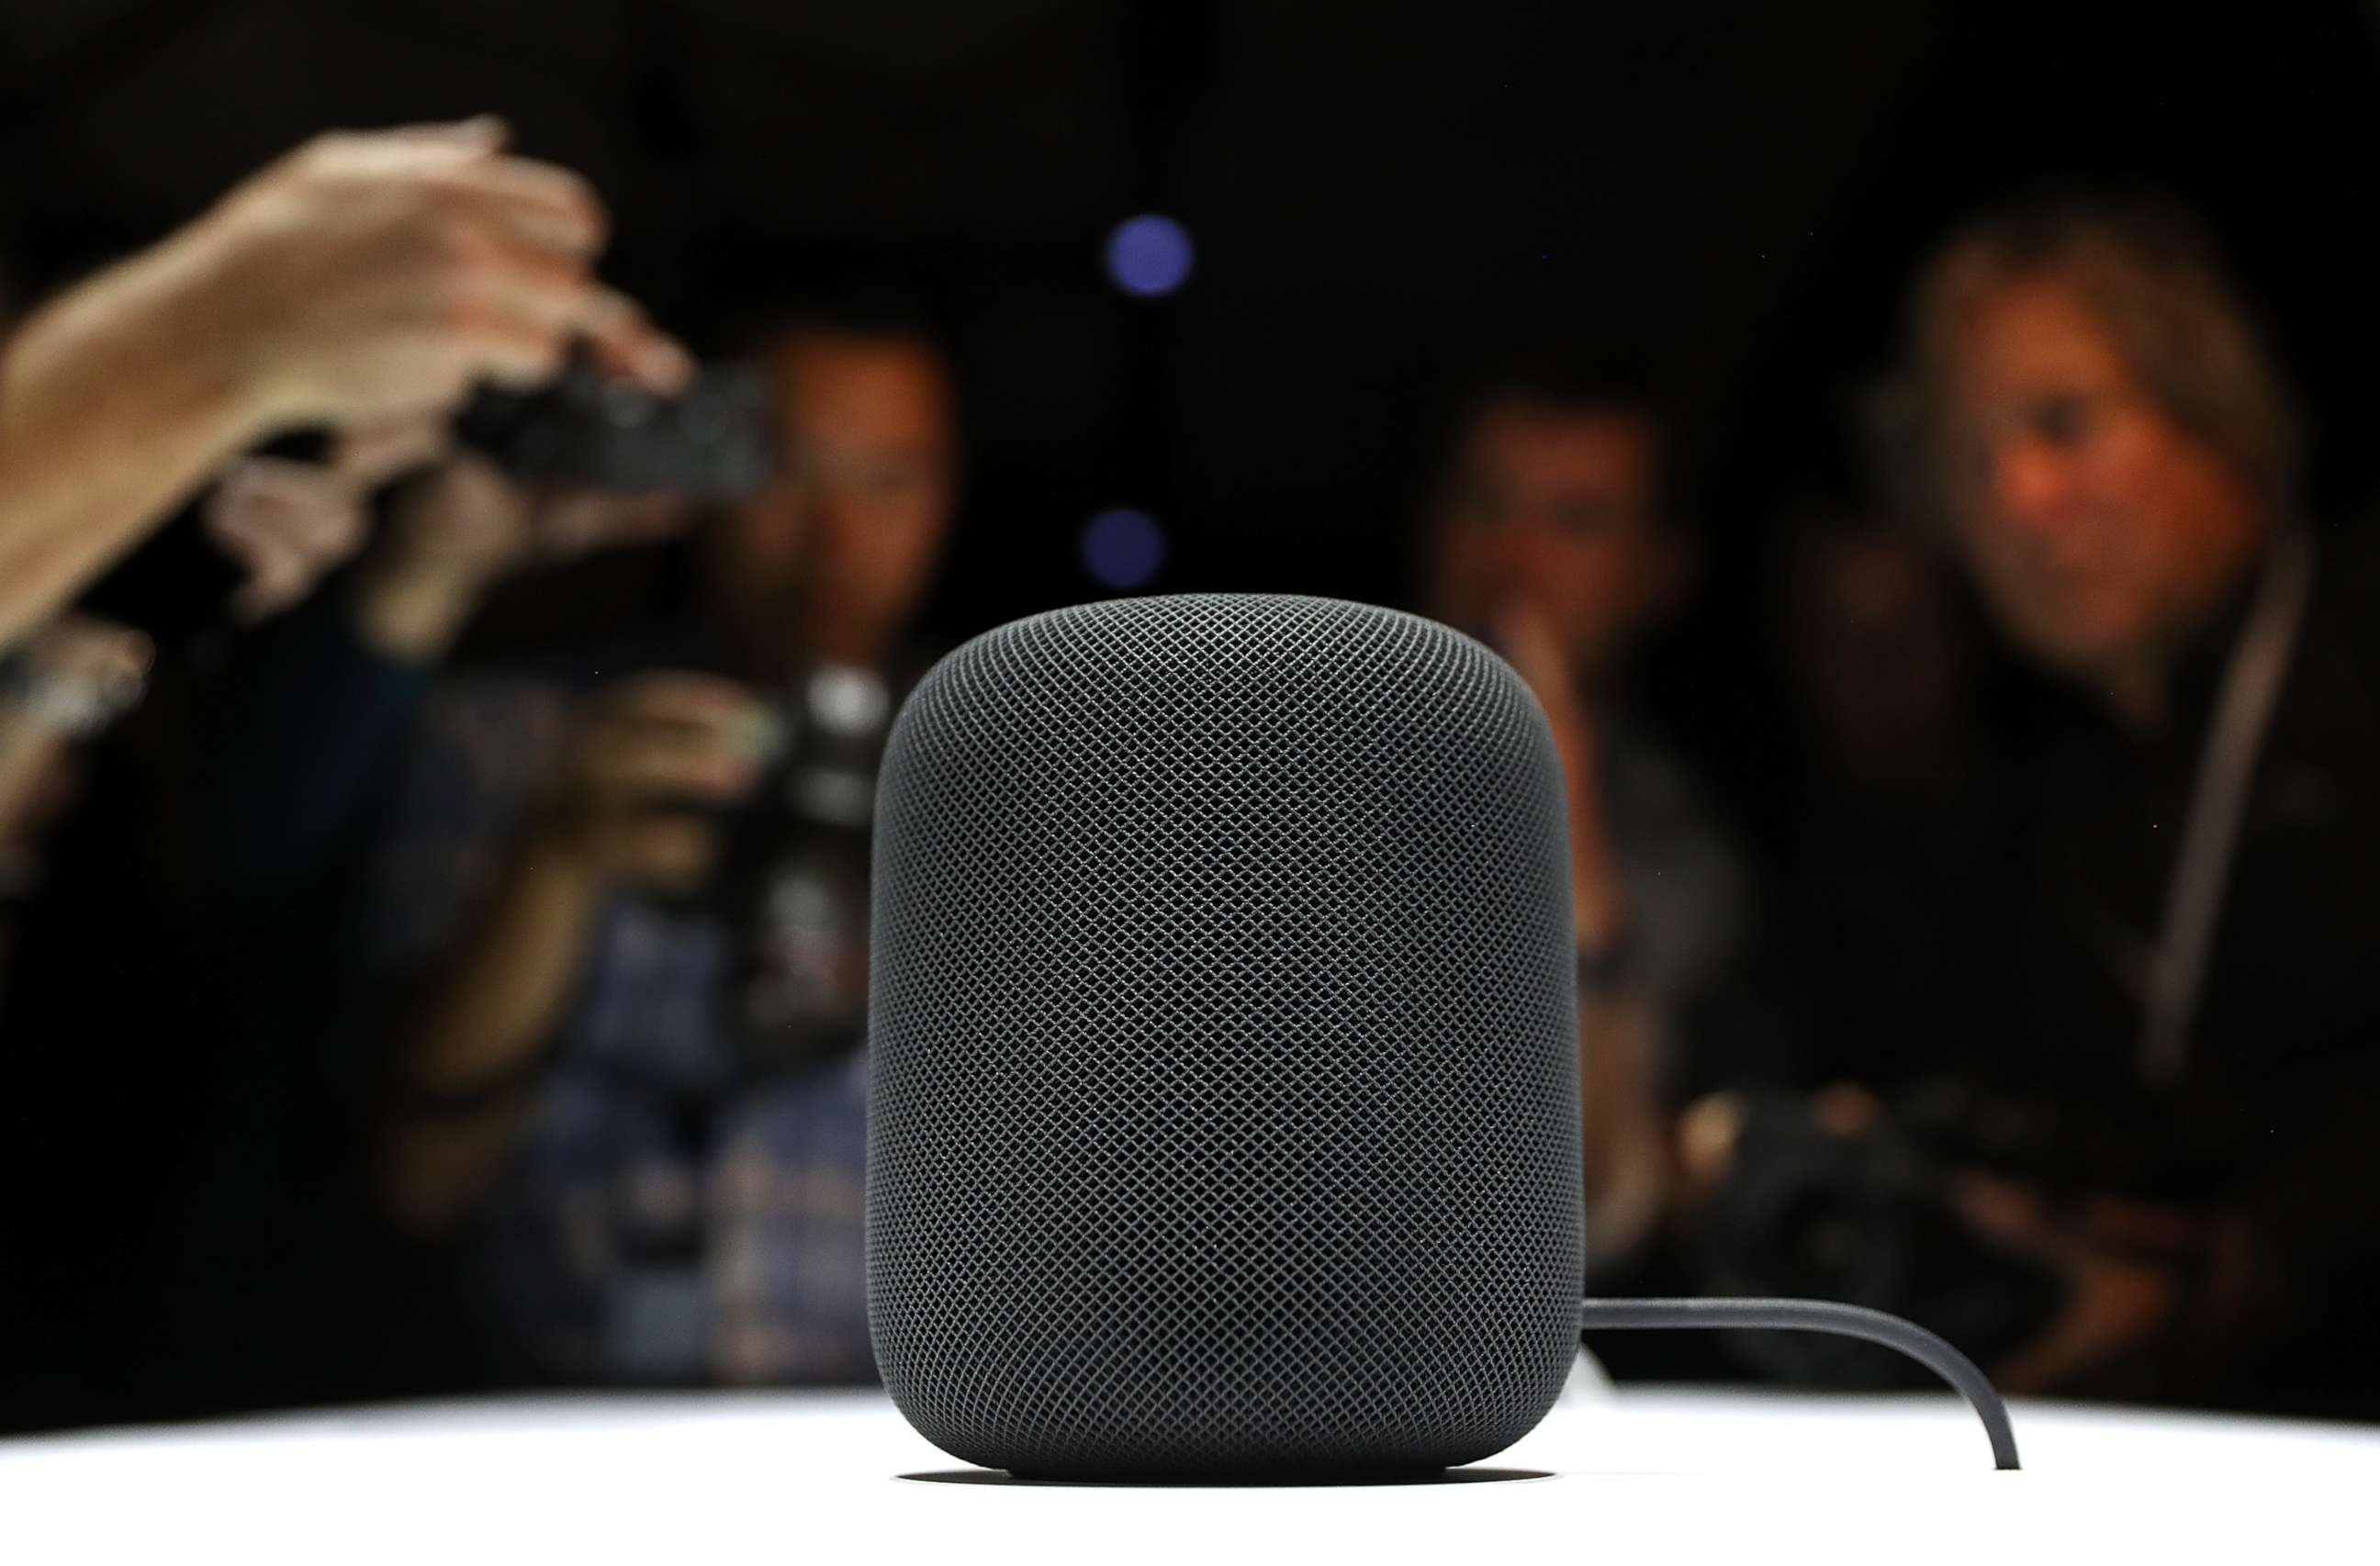 PHOTO: A prototype of Apple's new HomePod is displayed during the 2017 Apple Worldwide Developer Conference (WWDC) at the San Jose Convention Center, June 5, 2017 in San Jose, Calif.